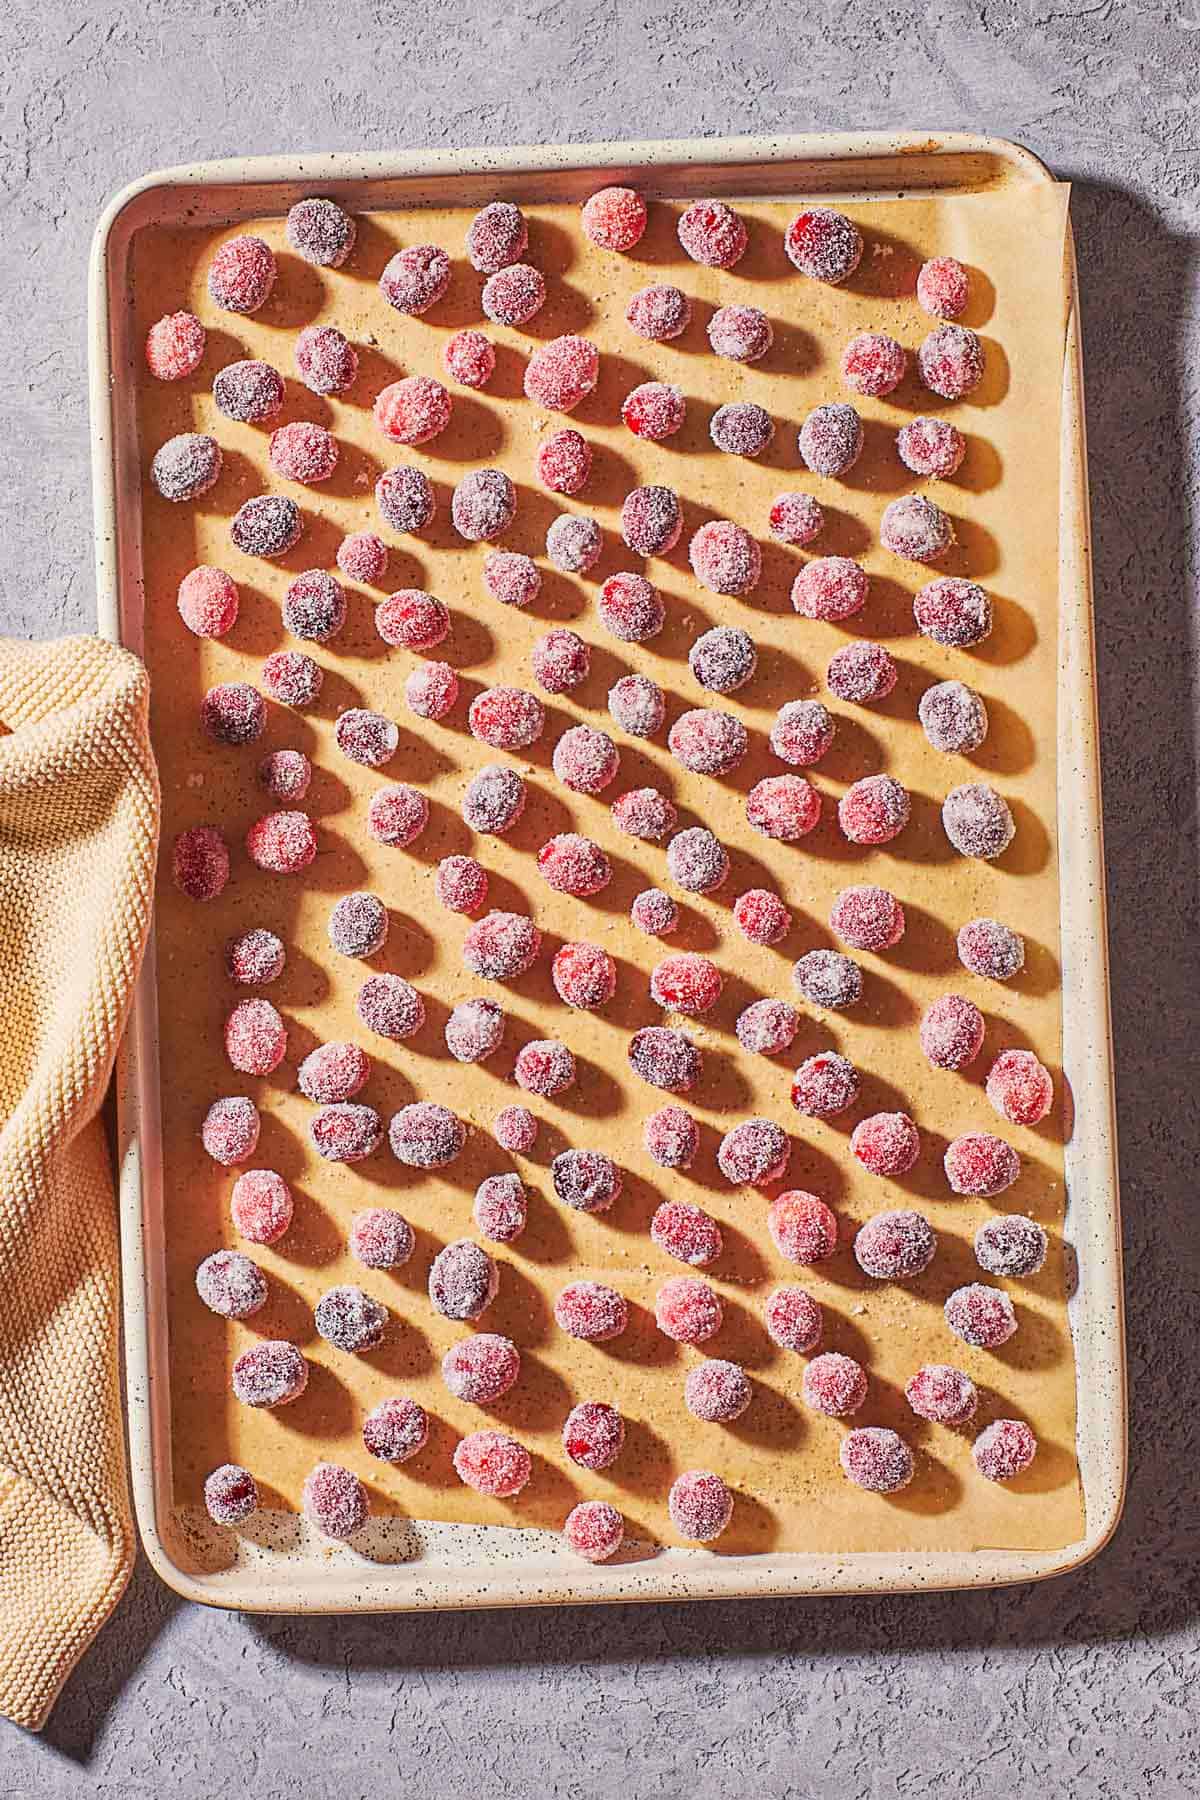 sugared cranberries spread evenly on a baking sheet lined with parchment paper.